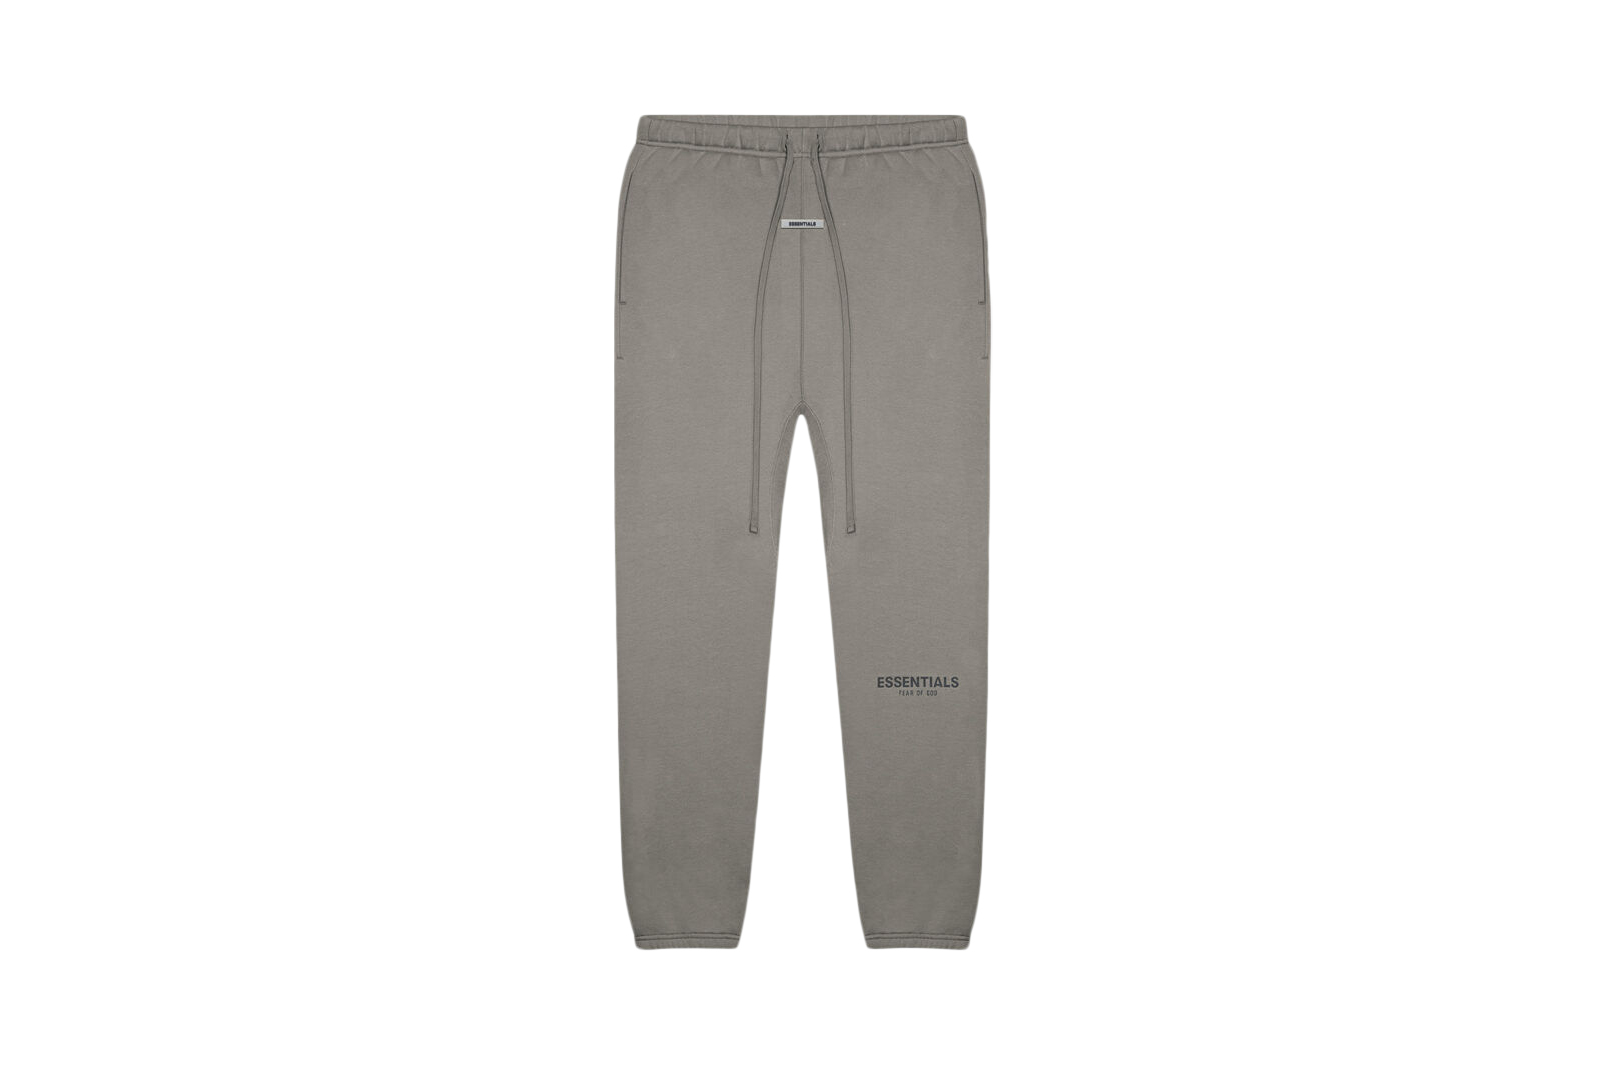 FEAR OF GOD ESSENTIALS Sweatpants (SS20) Gray Flannel/Charcoal